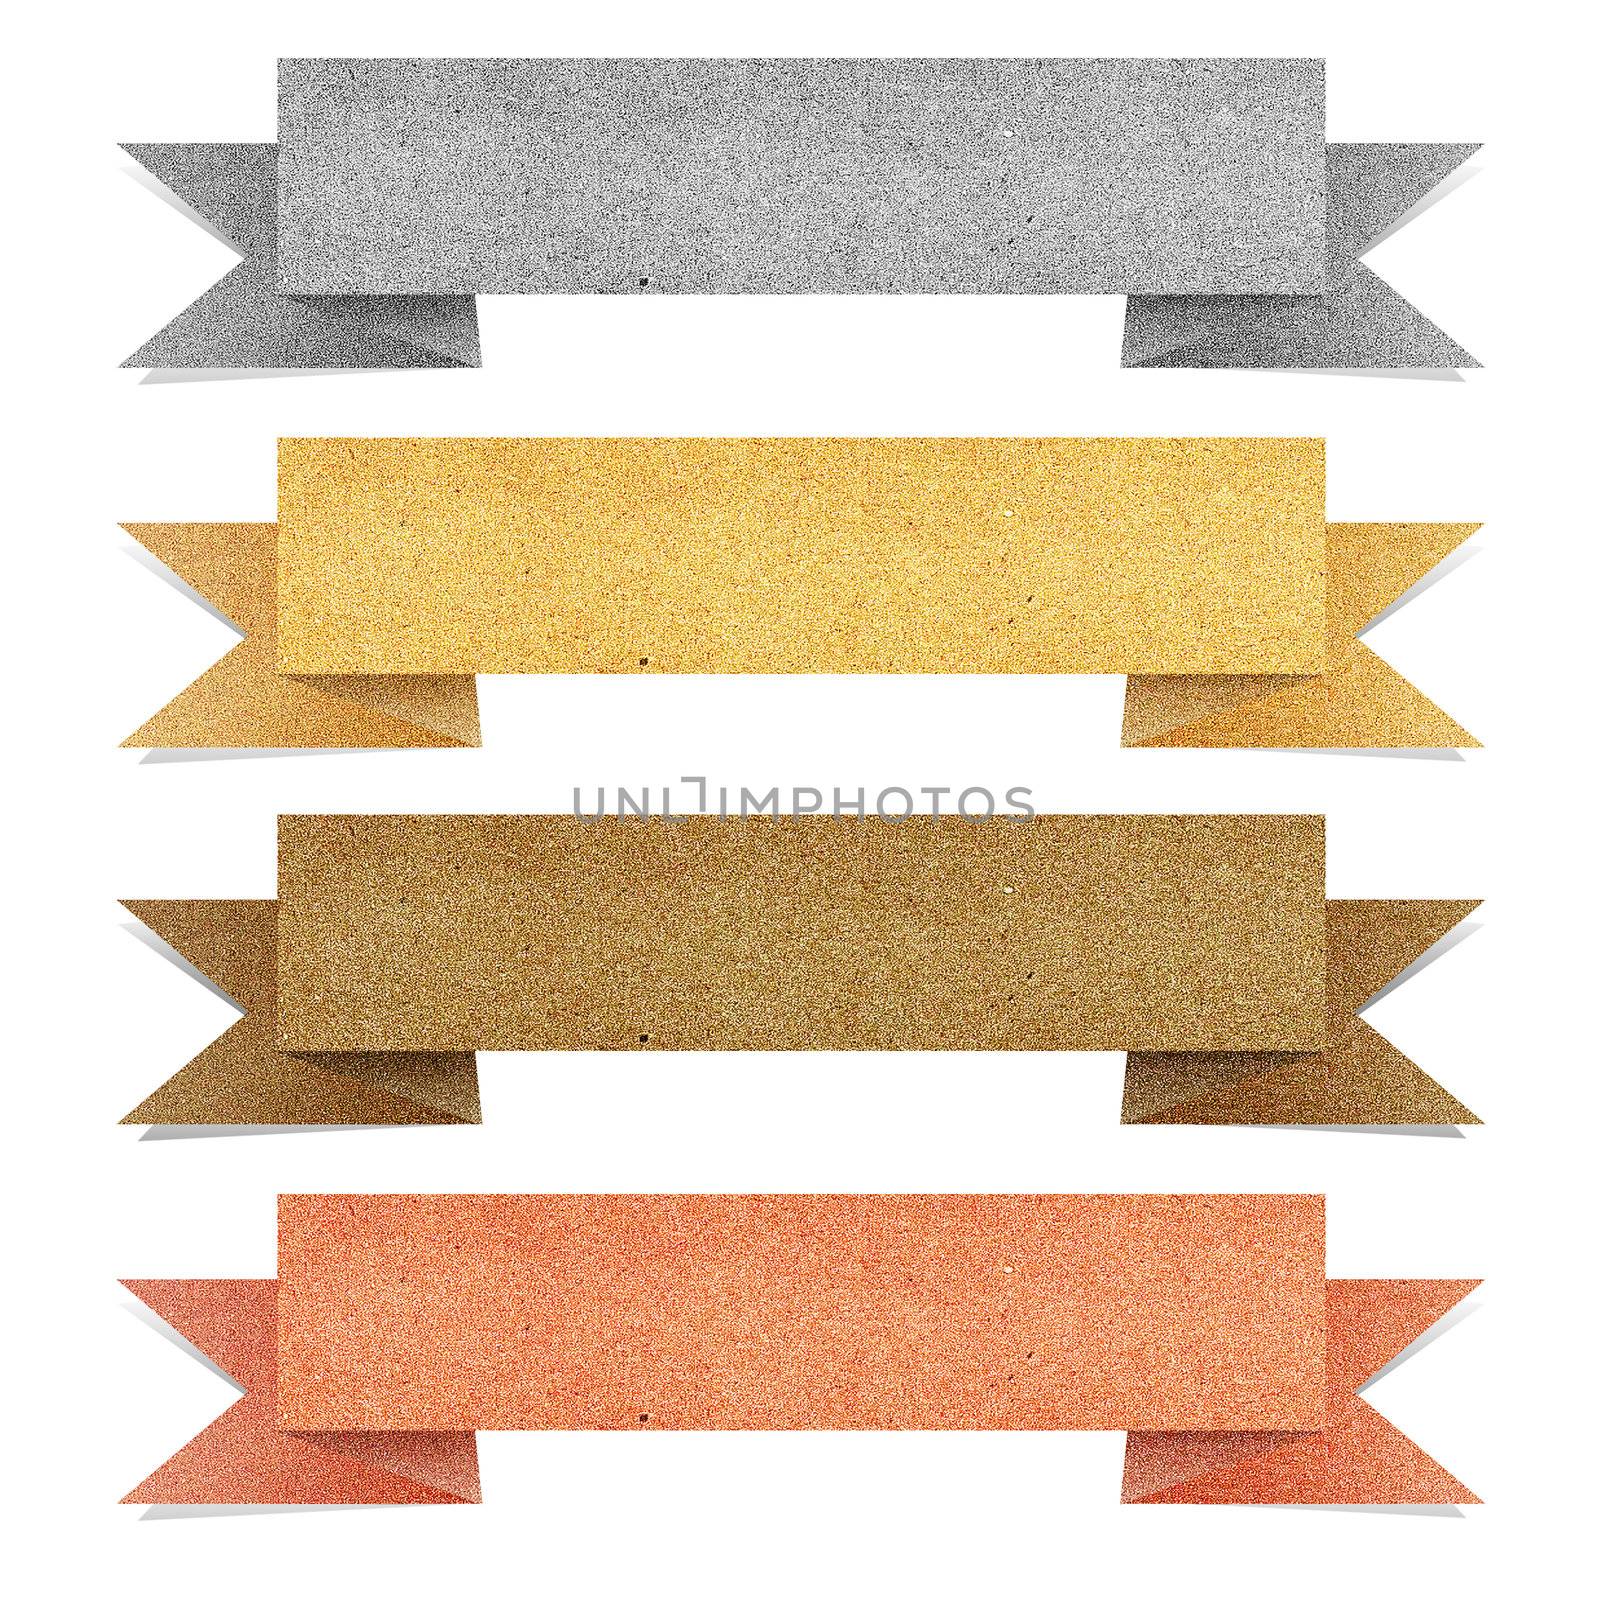 Paper texture ,Header tag recycled paper on white background